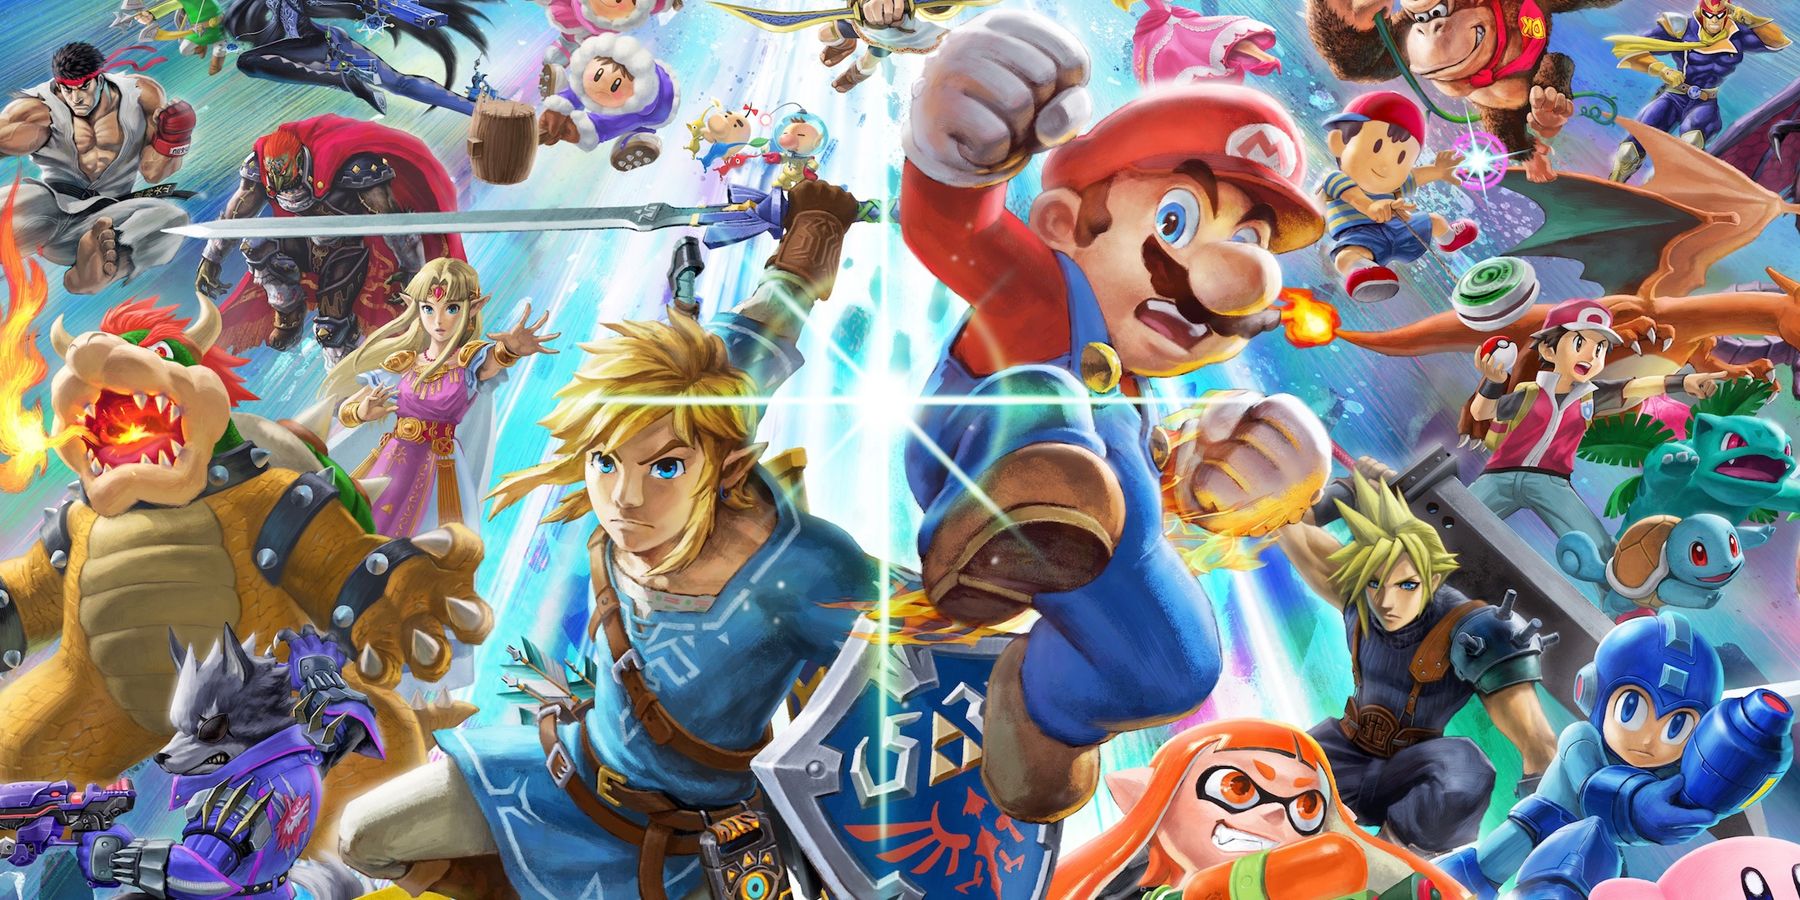 Fighters of Super Smash Bros. Ultimate